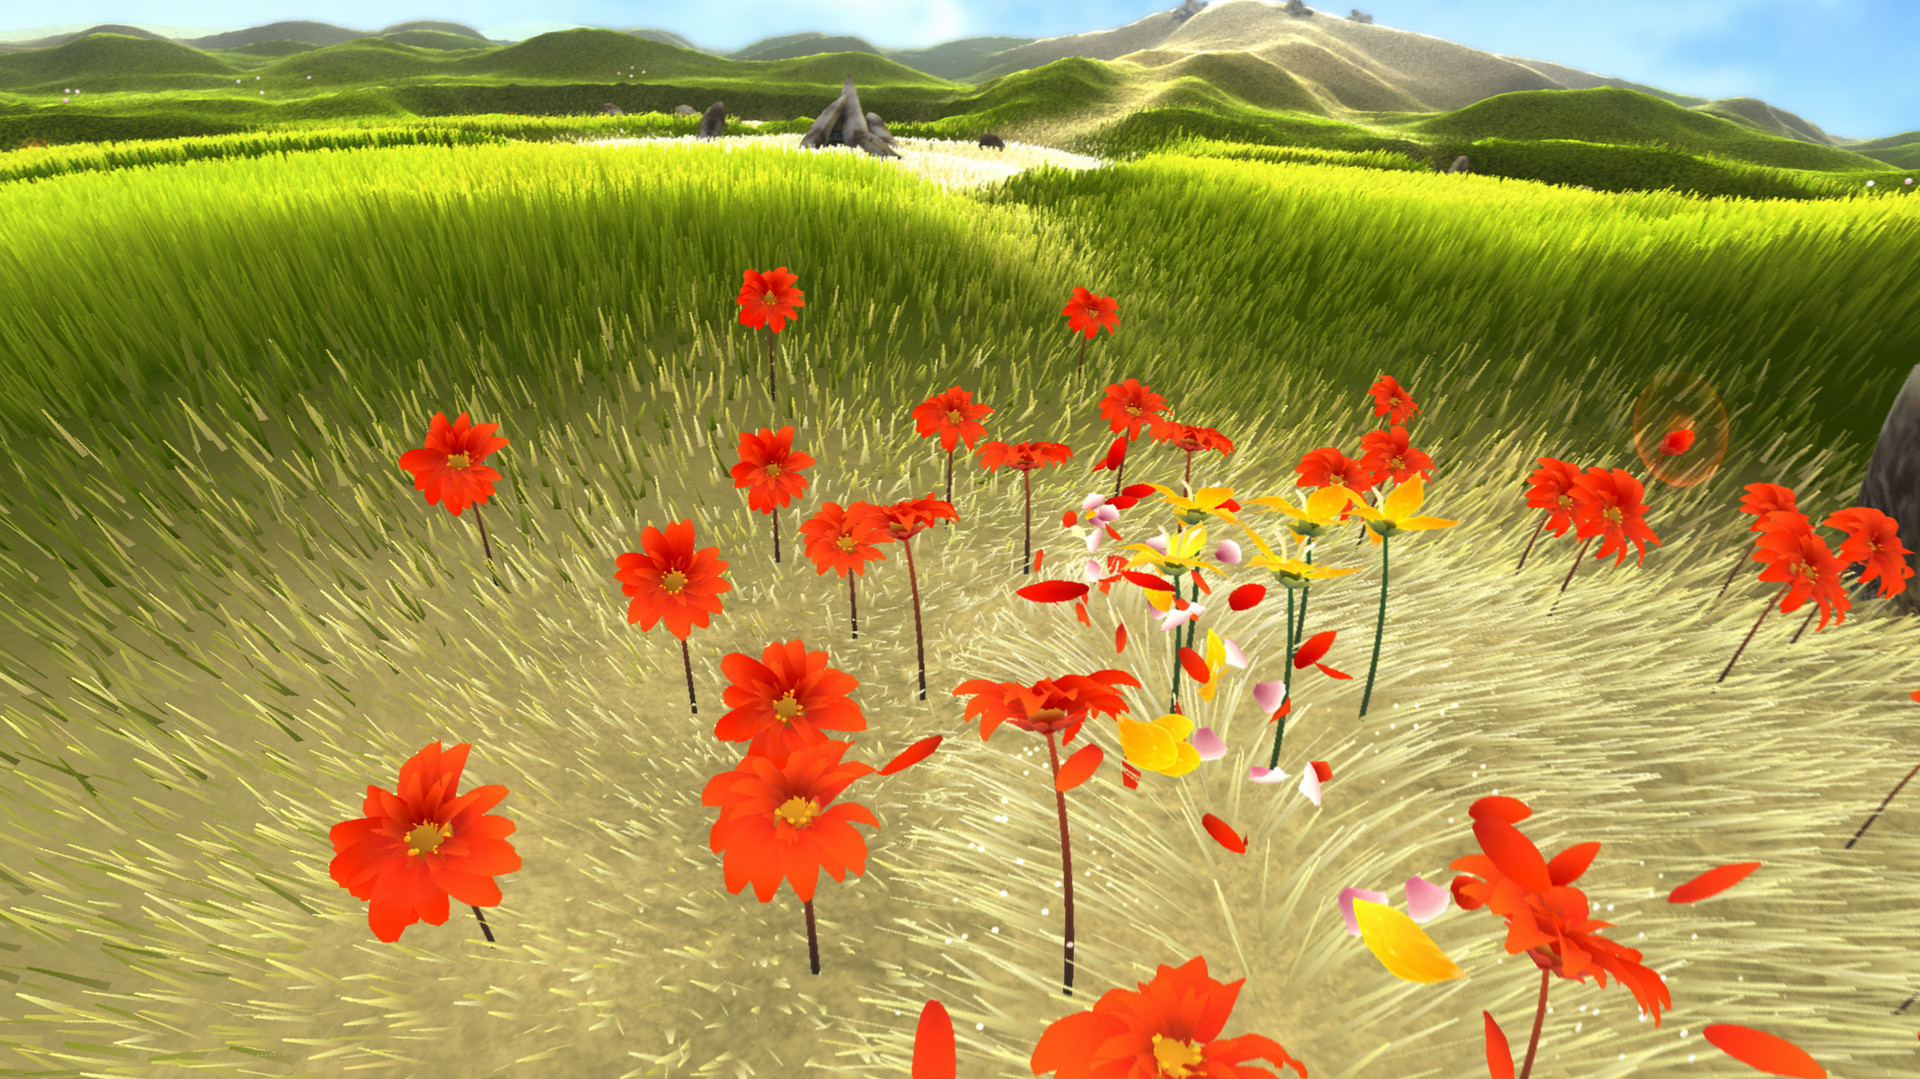 Created by Jenova Chen and Nicholas Clark, Flower was first announced in 2007 during the Tokyo Game Show.  (Annapurna Interactive /Playback)